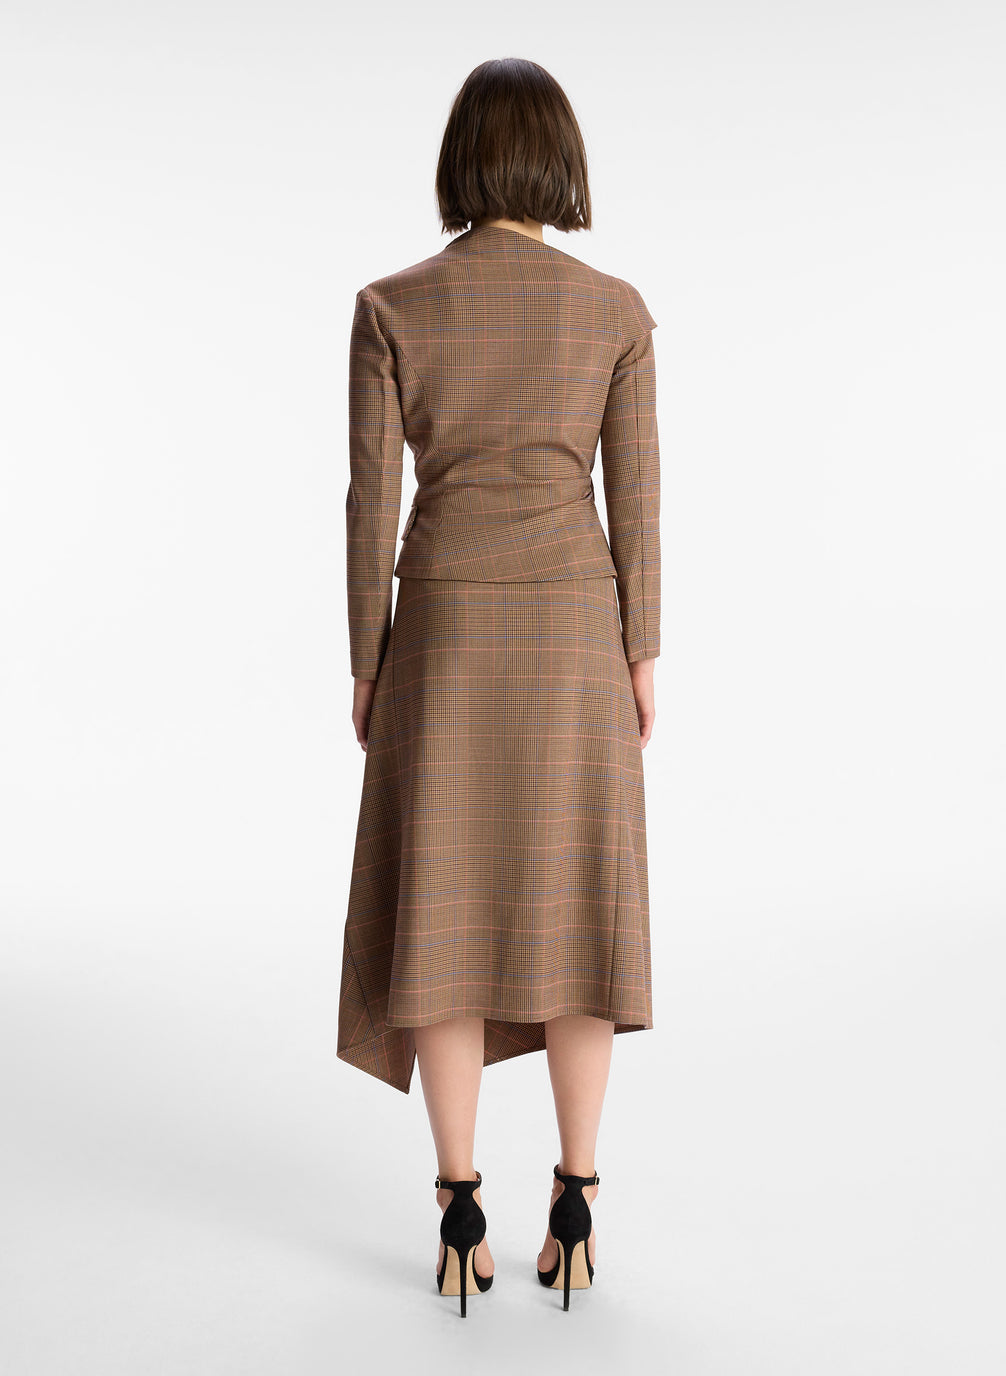 back view of woman wearing brown plaid asymmetric long sleeve top and matching brown plaid midi skirt